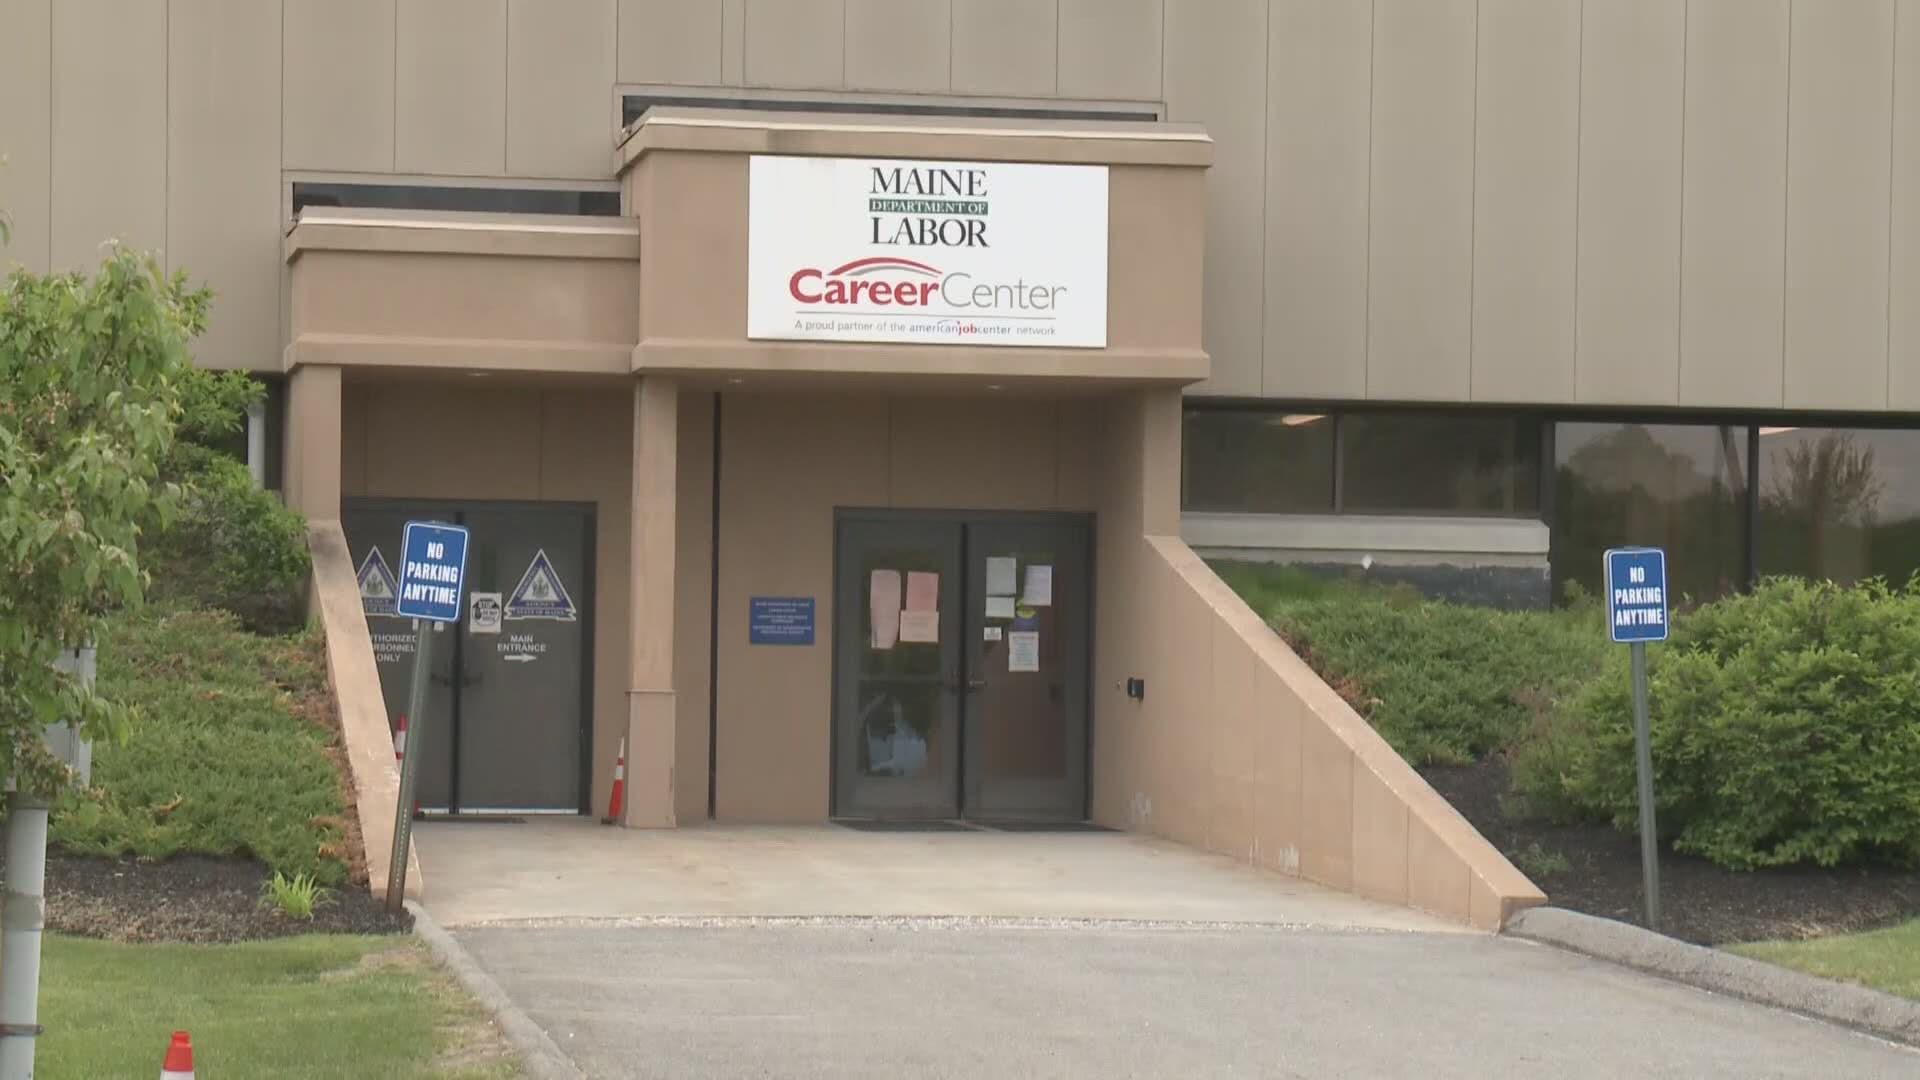 The Maine Department of Labor is blaming the bank for delayed unemployment payments that should have been paid on Tuesday.